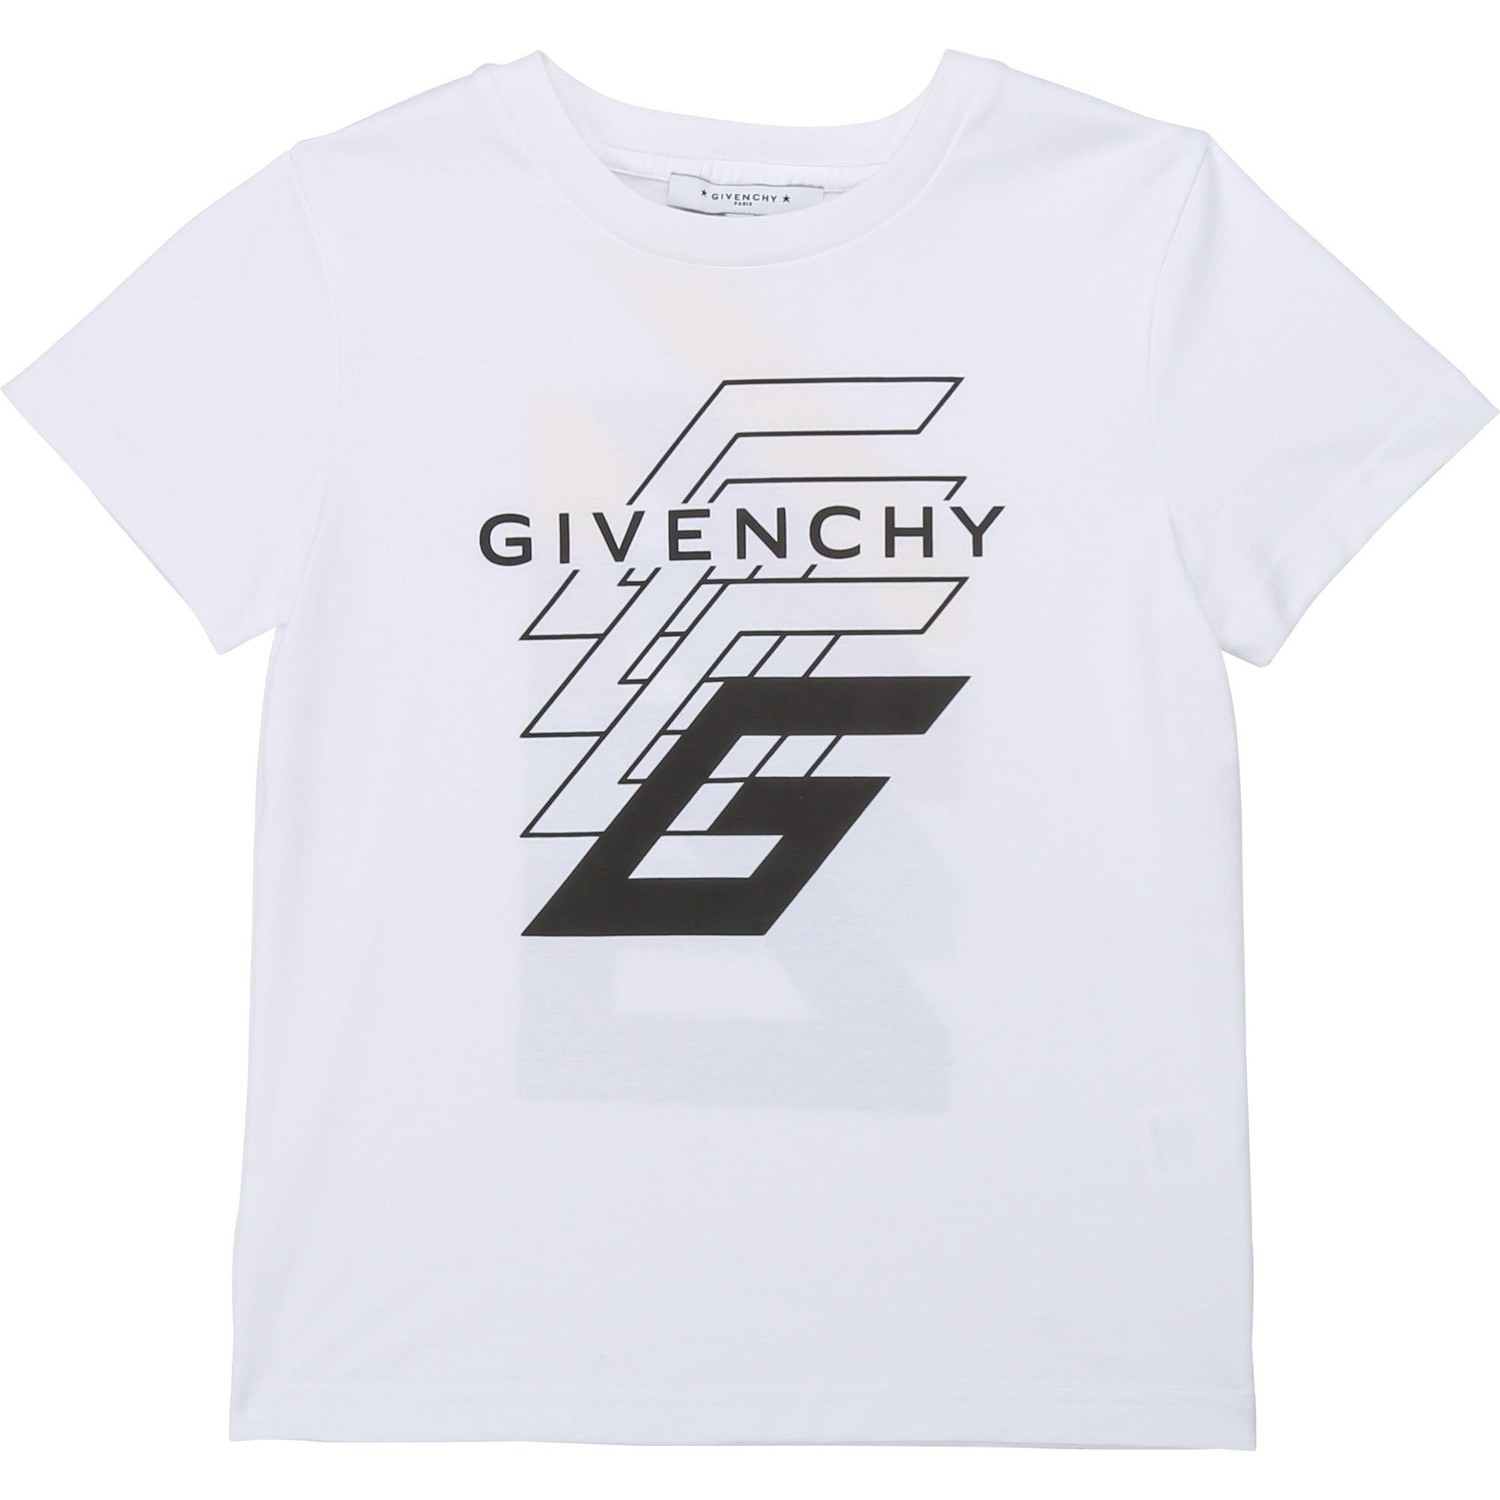 Givenchy Boys Cotton T-shirt White 4Y